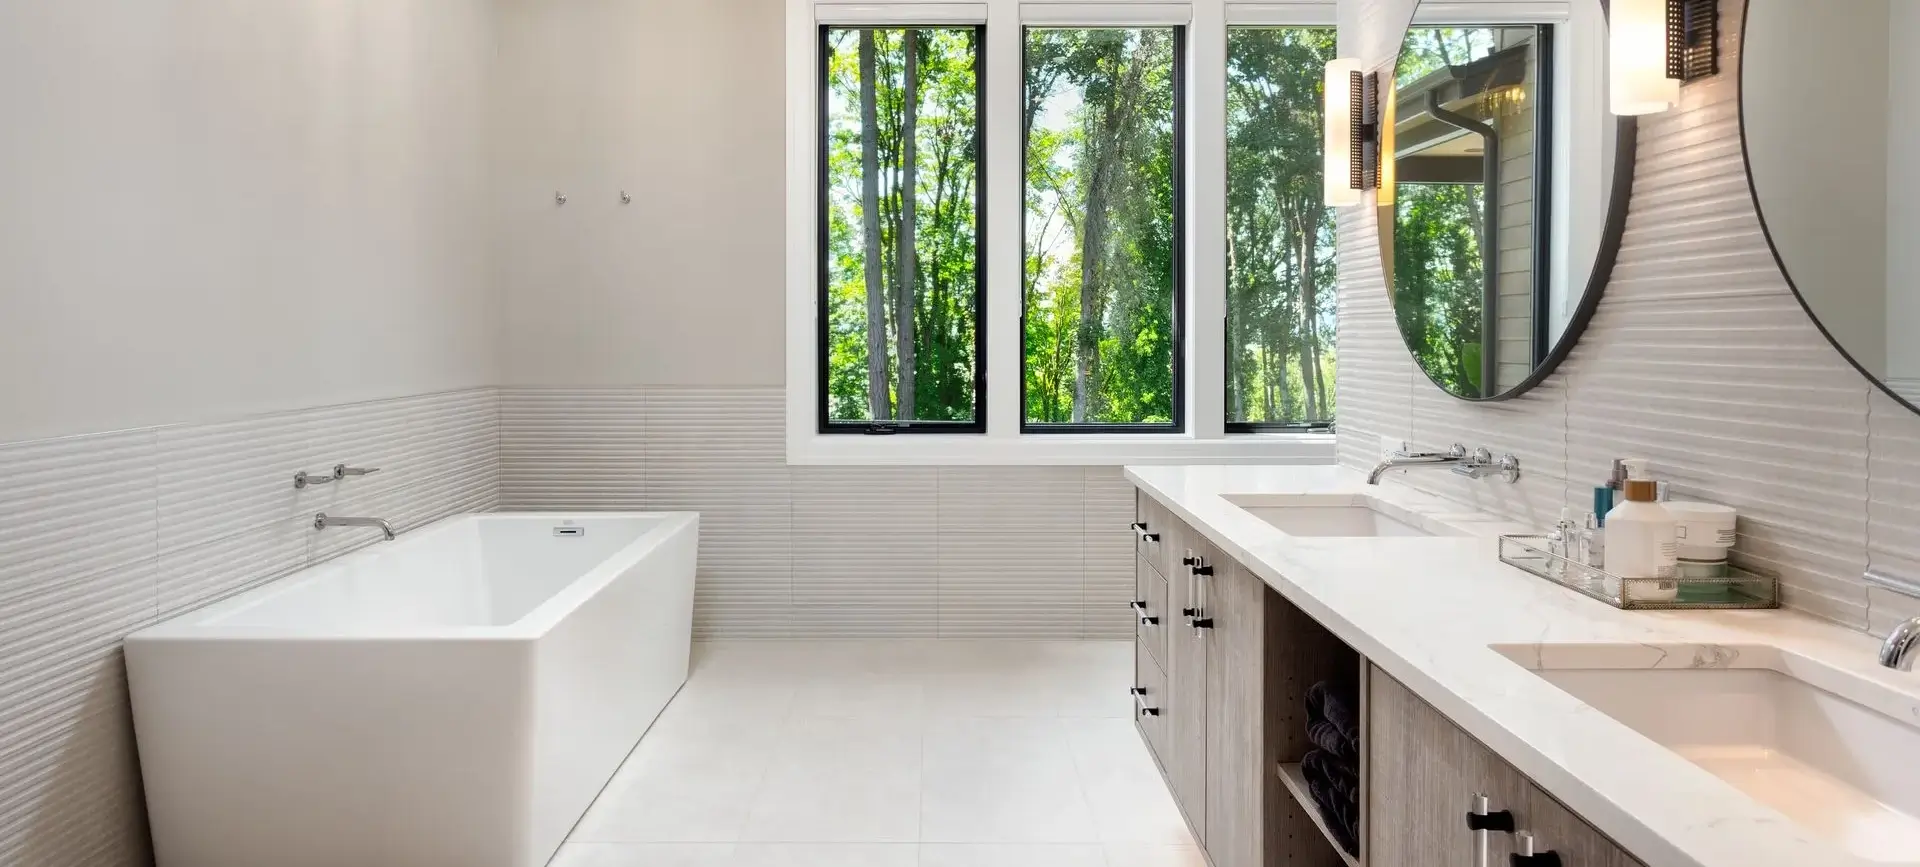 A bathroom with a tub and sink, and large windows.